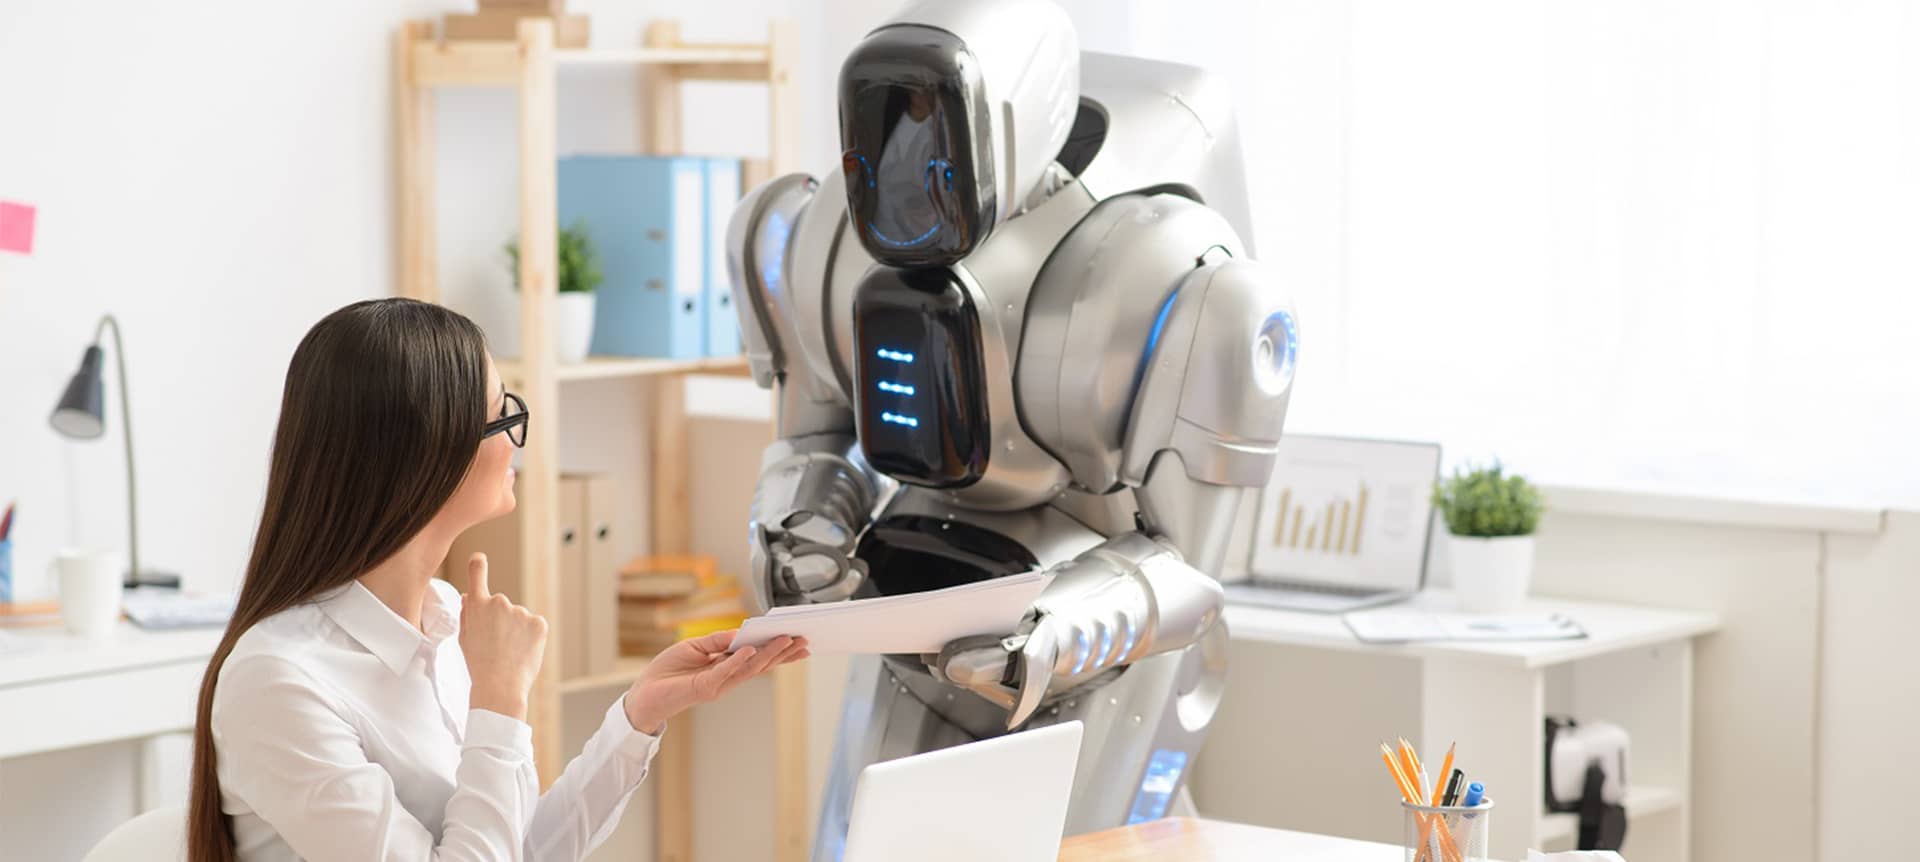 A recruiter interacting with a robot